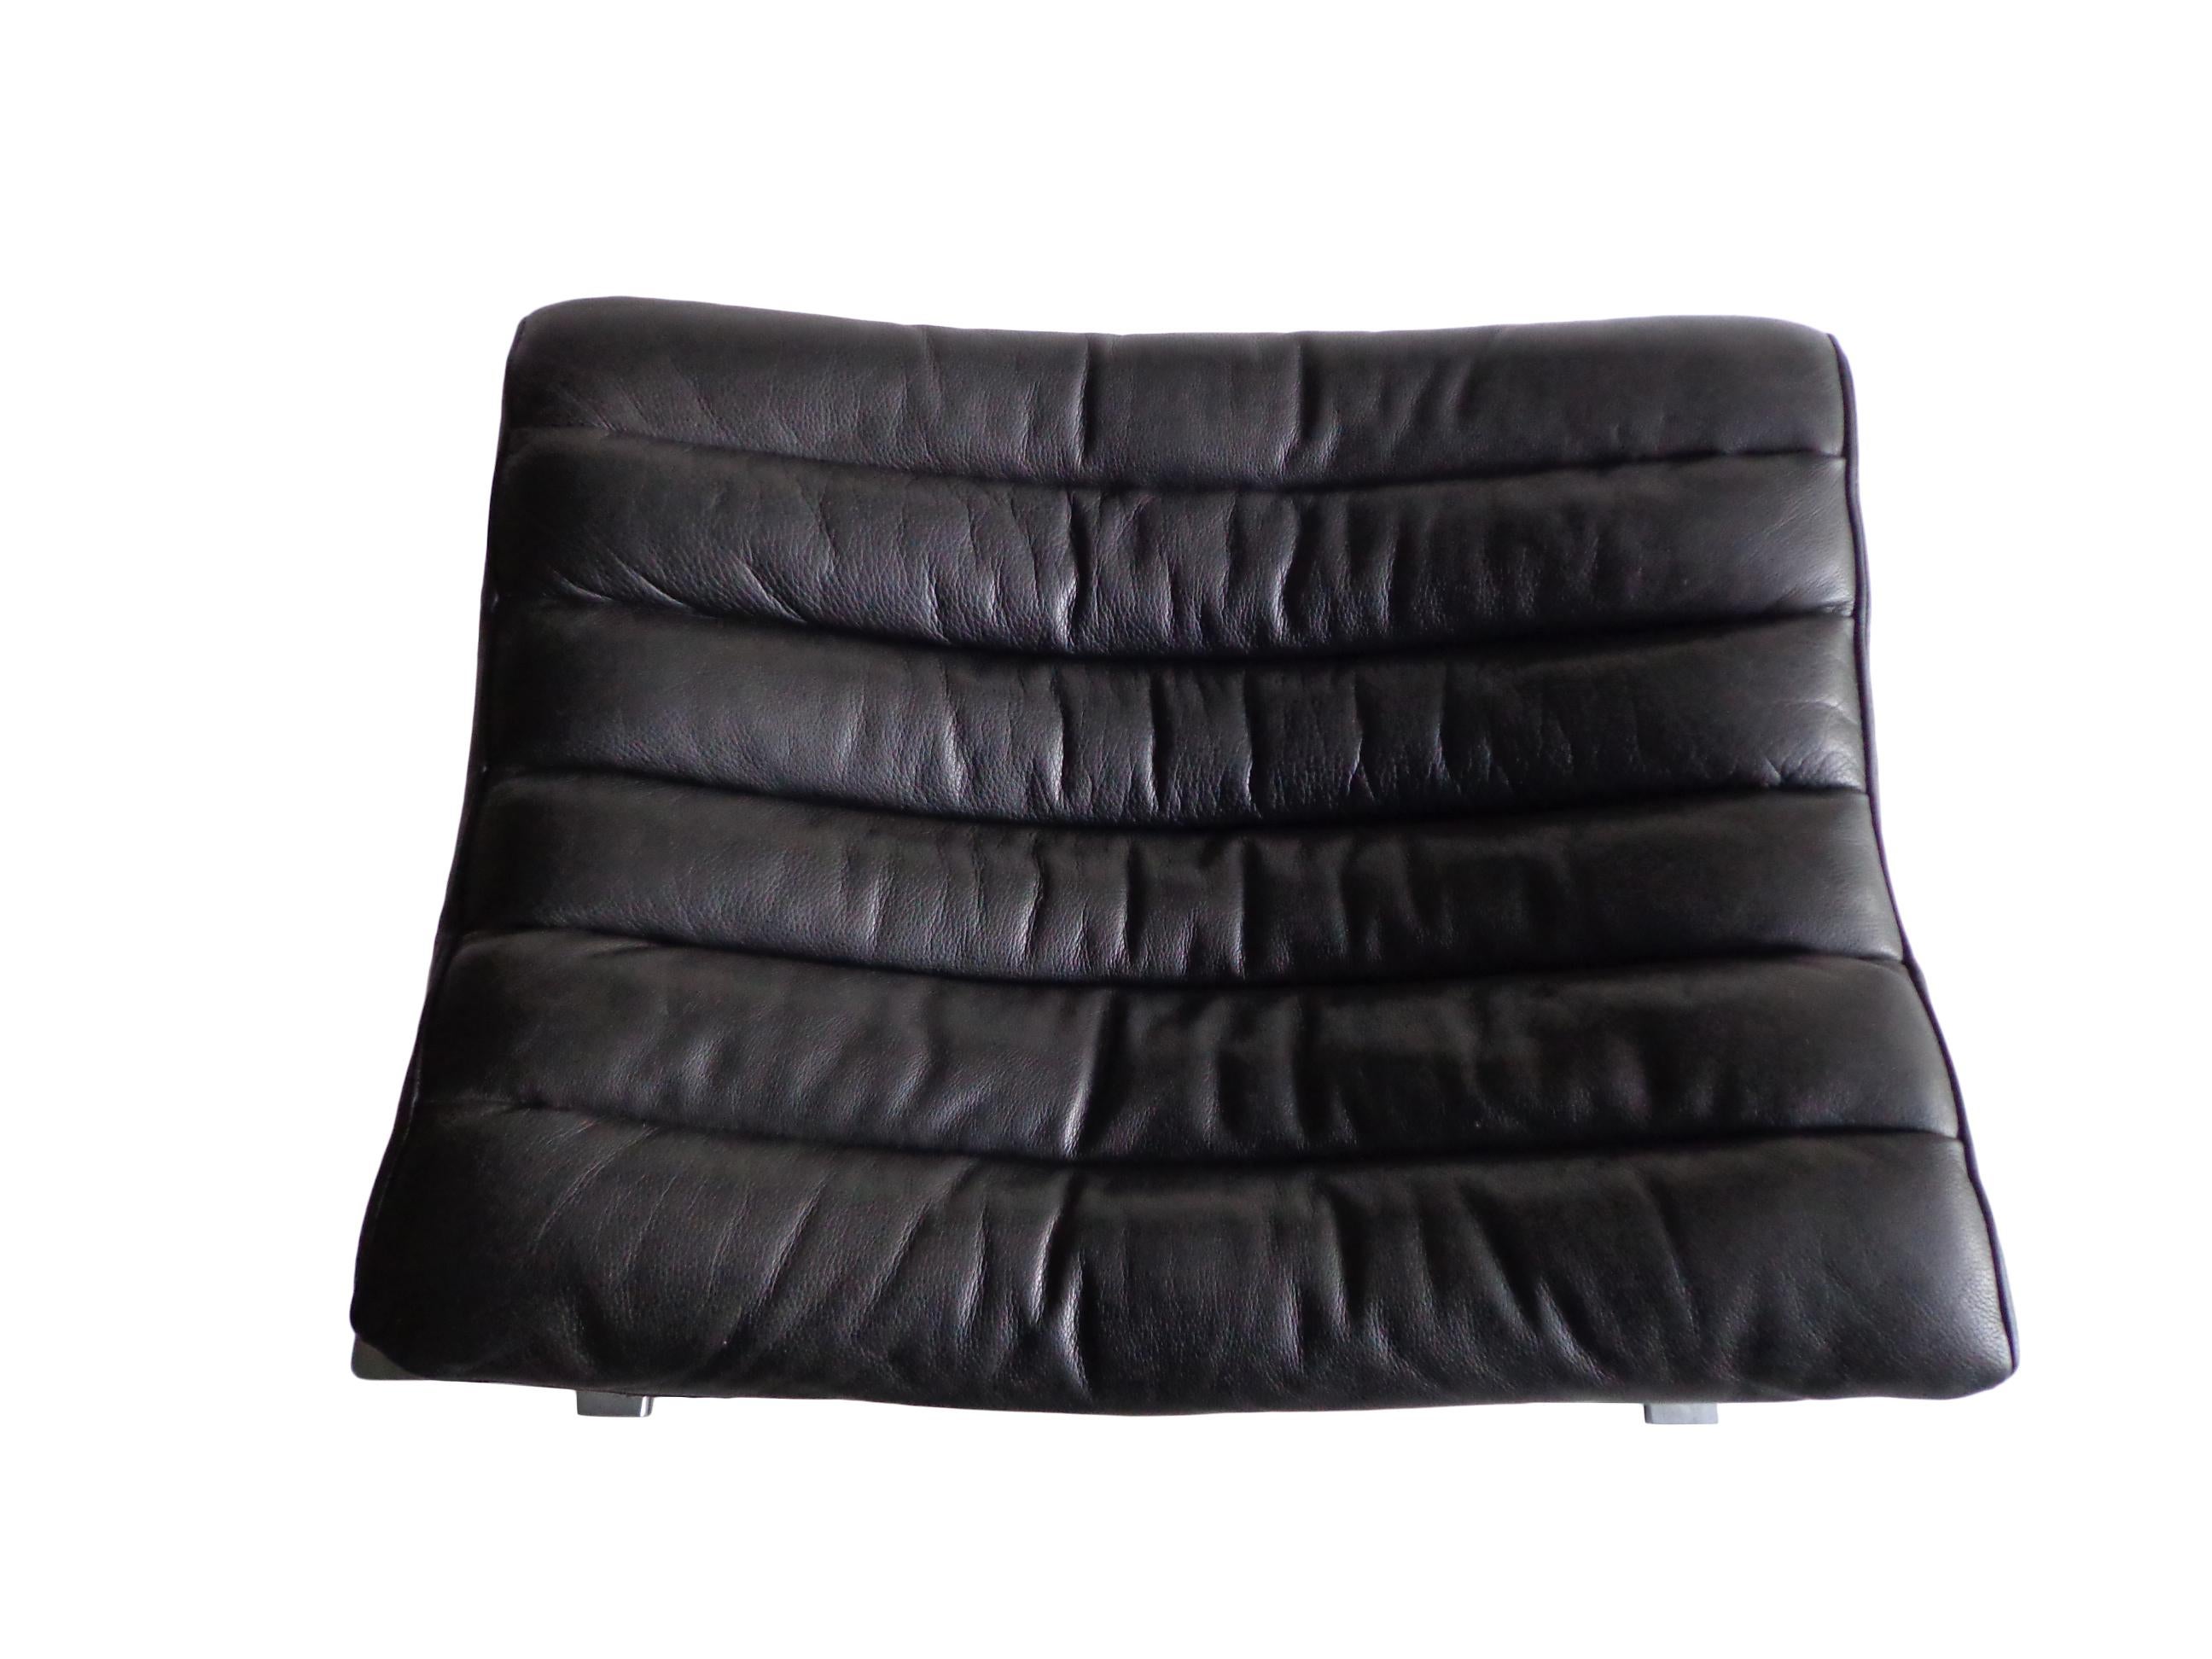 Arne Norell ‘Ari’ Lounge Chair and Ottoman in Original Black Leather Sweden, 60s For Sale 1